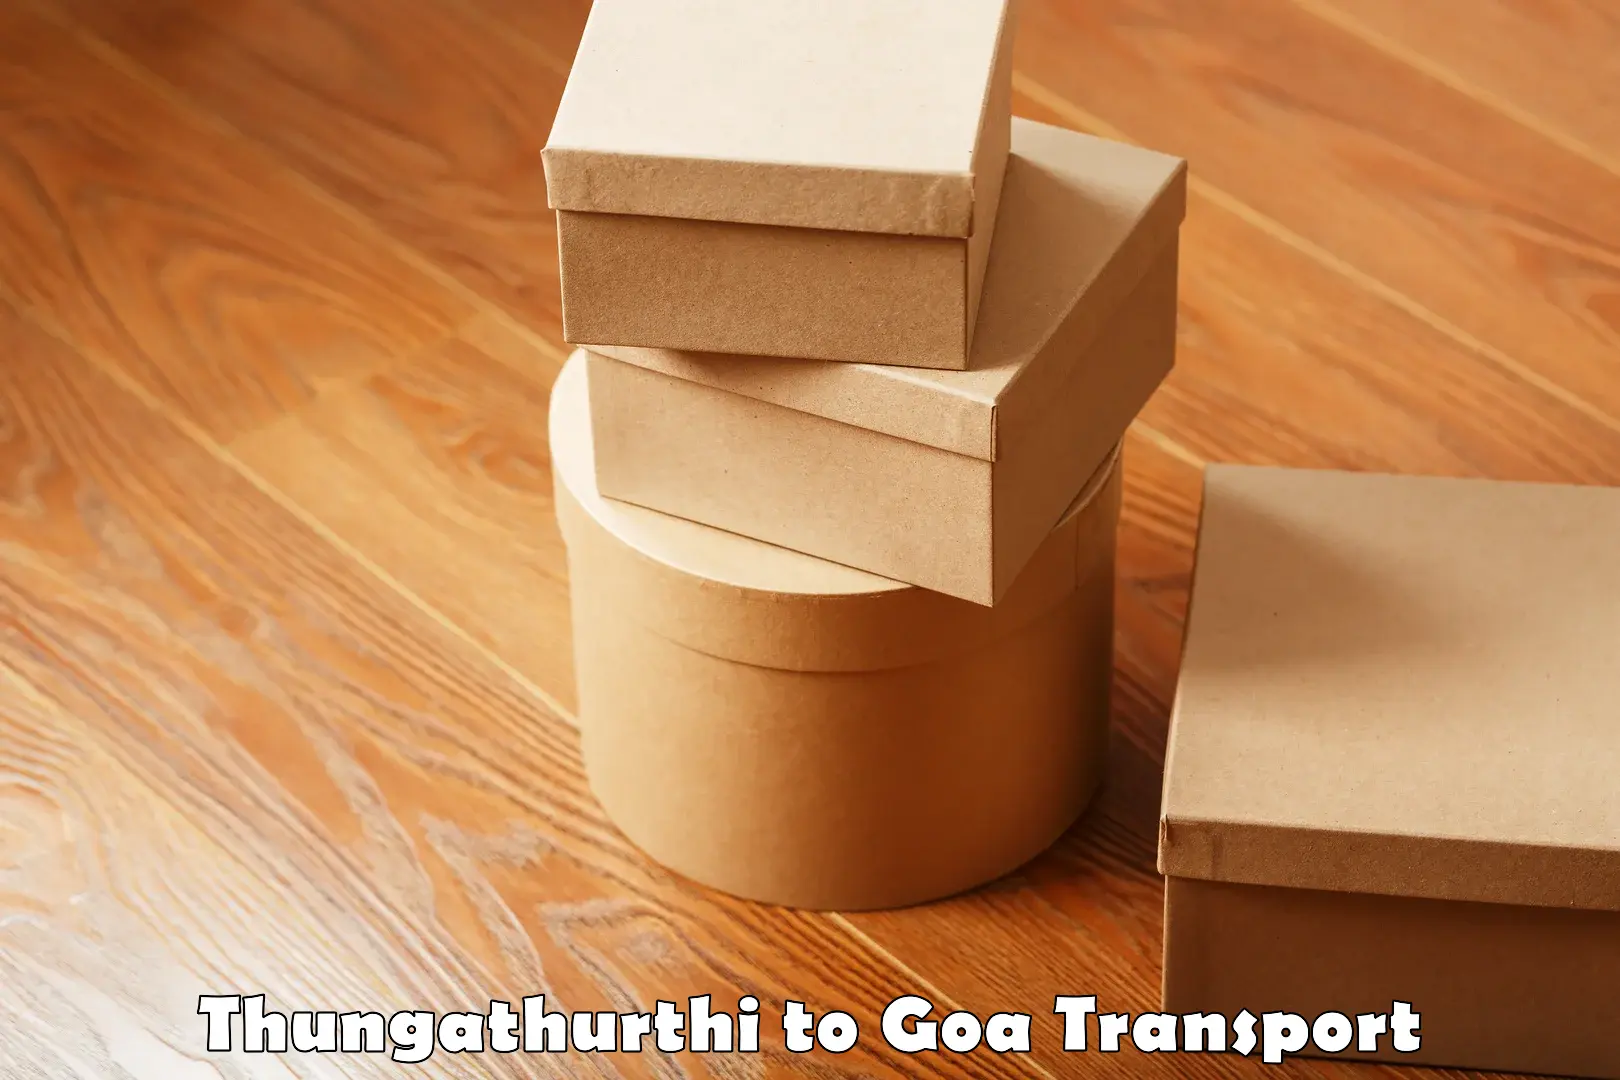 Daily transport service in Thungathurthi to Goa